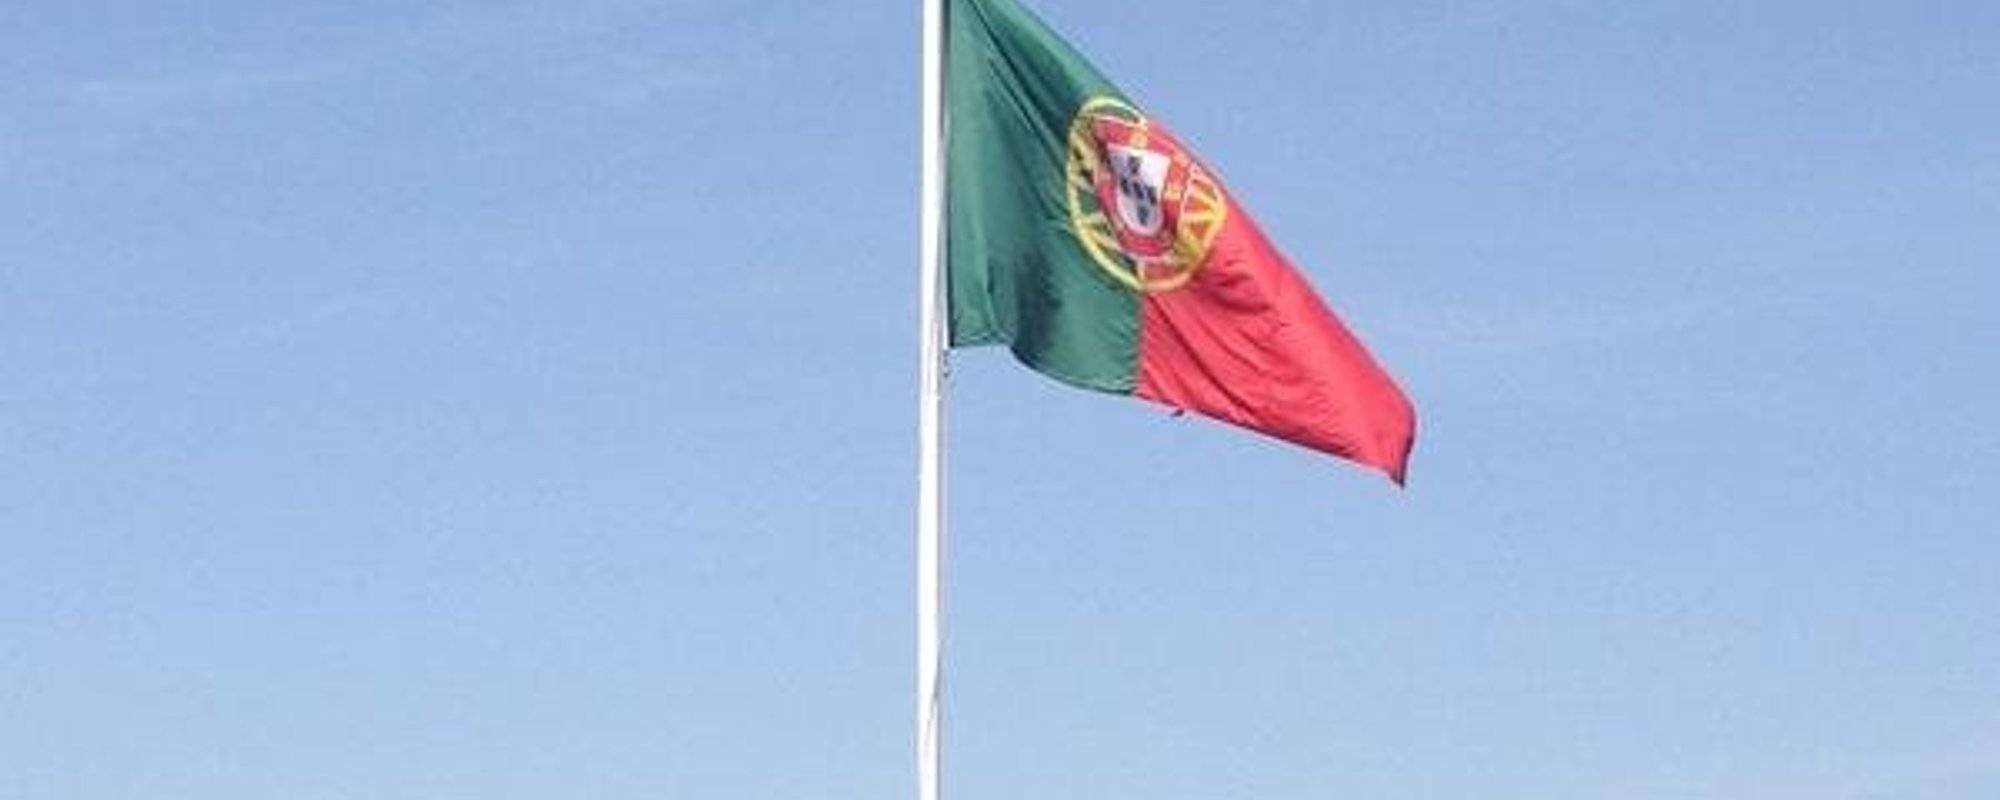 Travelfeed Cup (#tfcup) - @travelling-two supporting Portugal